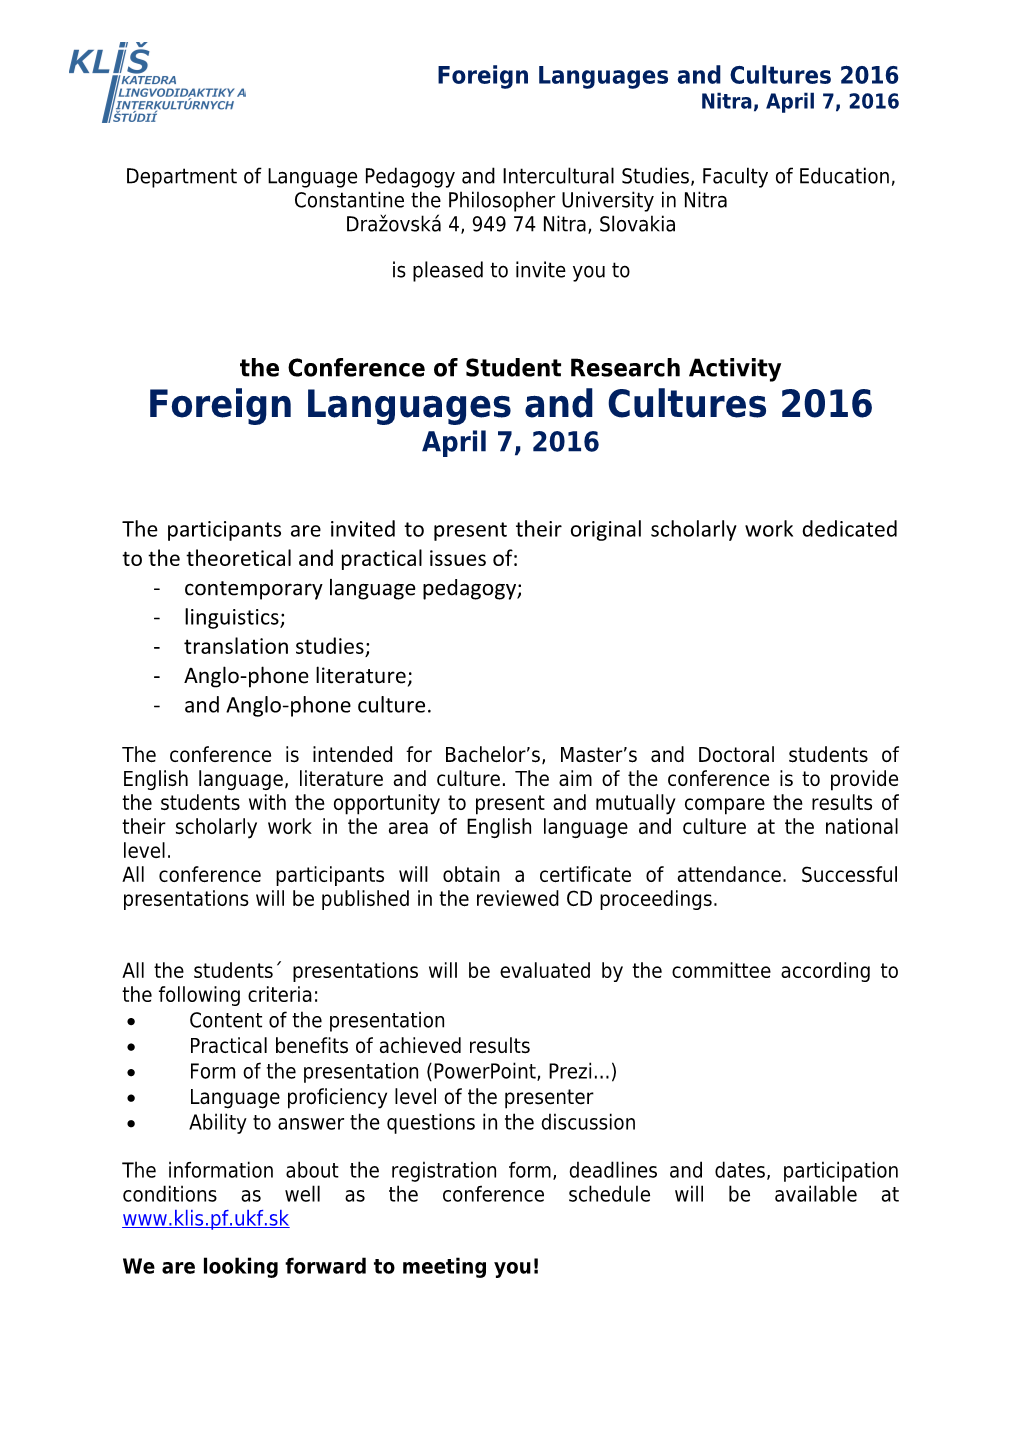 Department of Language Pedagogy and Intercultural Studies, Faculty of Education